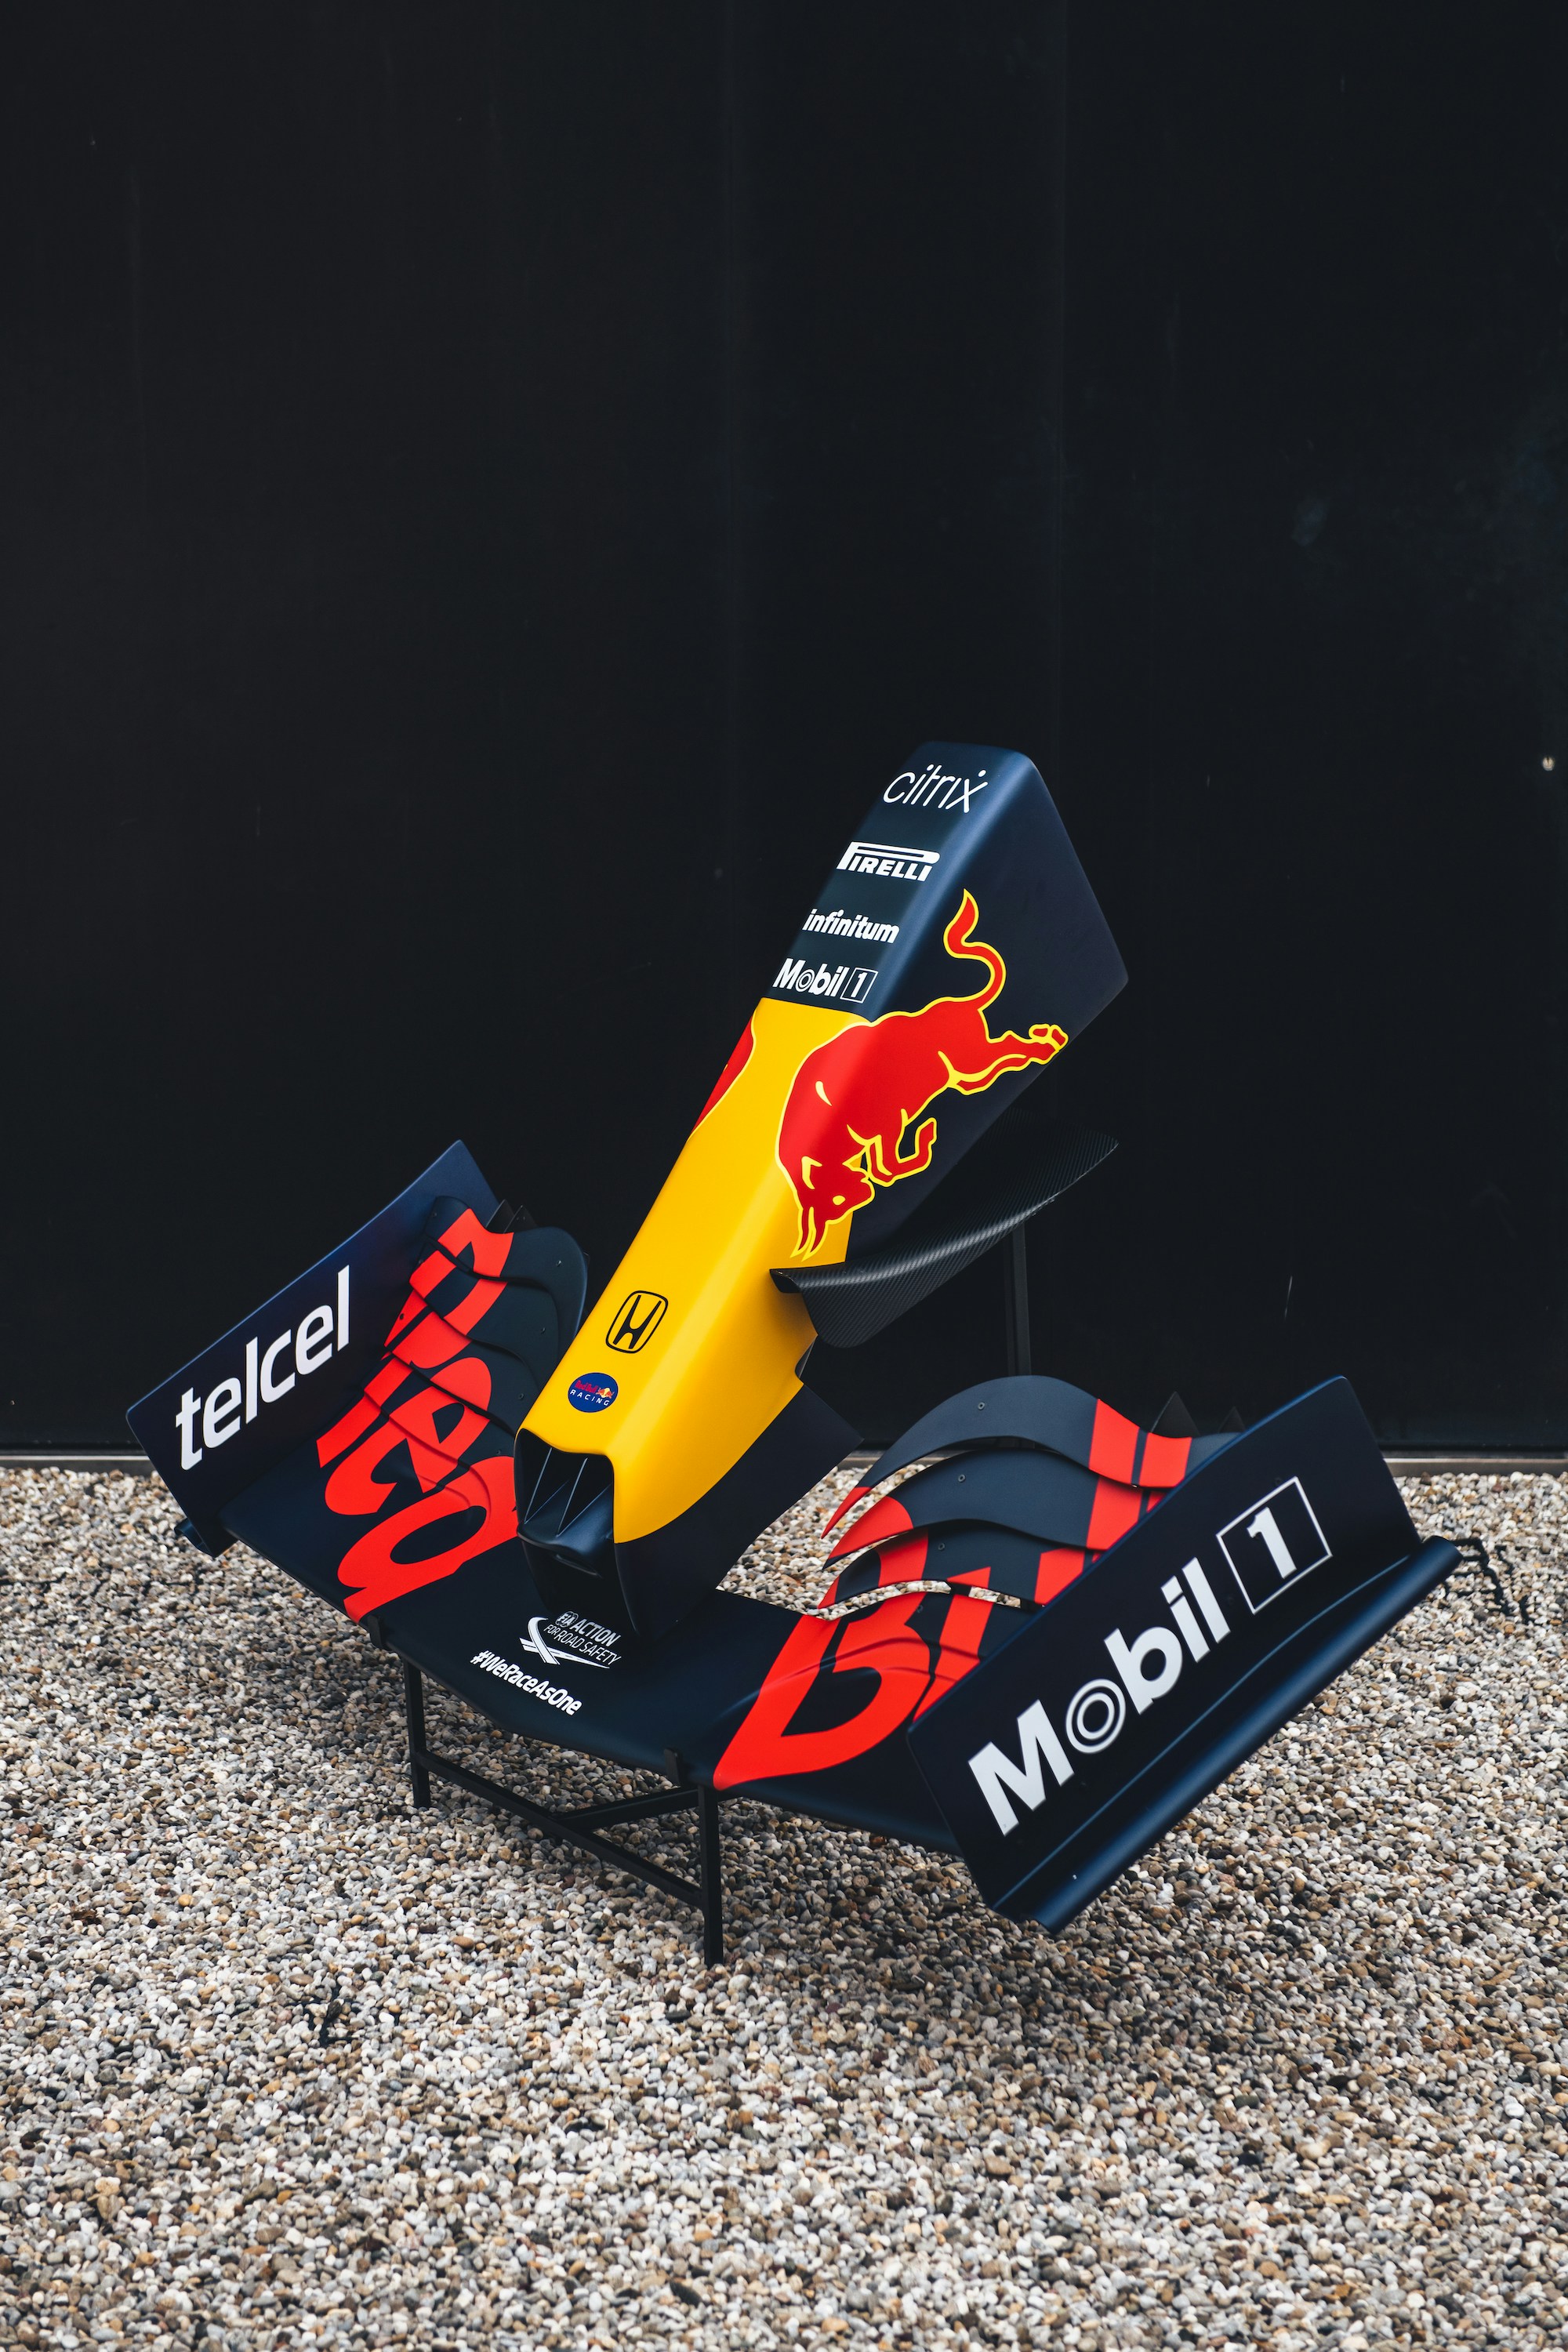 2021 REDBULL RB16B FRONT WING REPLICA - 1:1 SCALE for sale by auction in  Harelbeke, Belgium